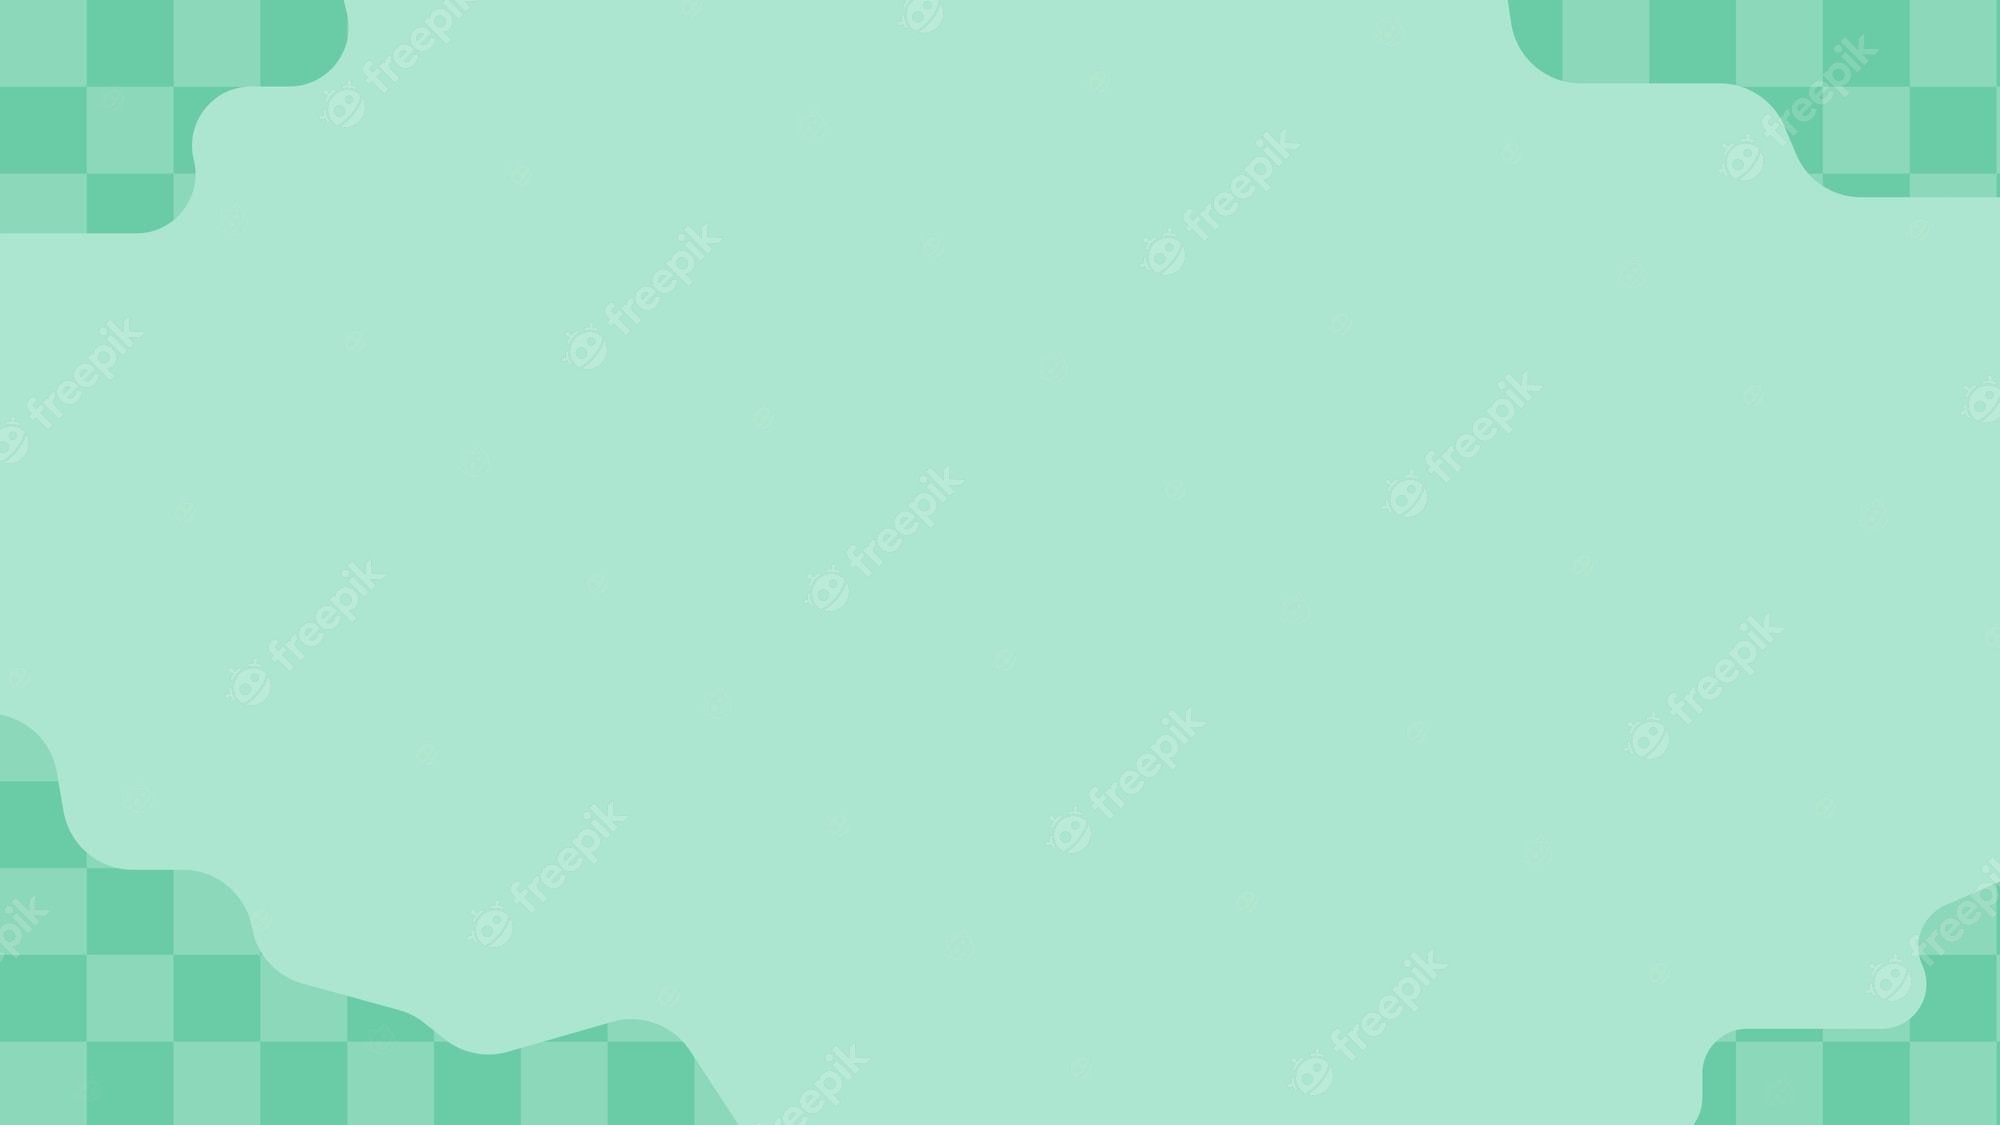 Premium Vector. Green aesthetic abstract minimal background checkered gingham plaid pattern background